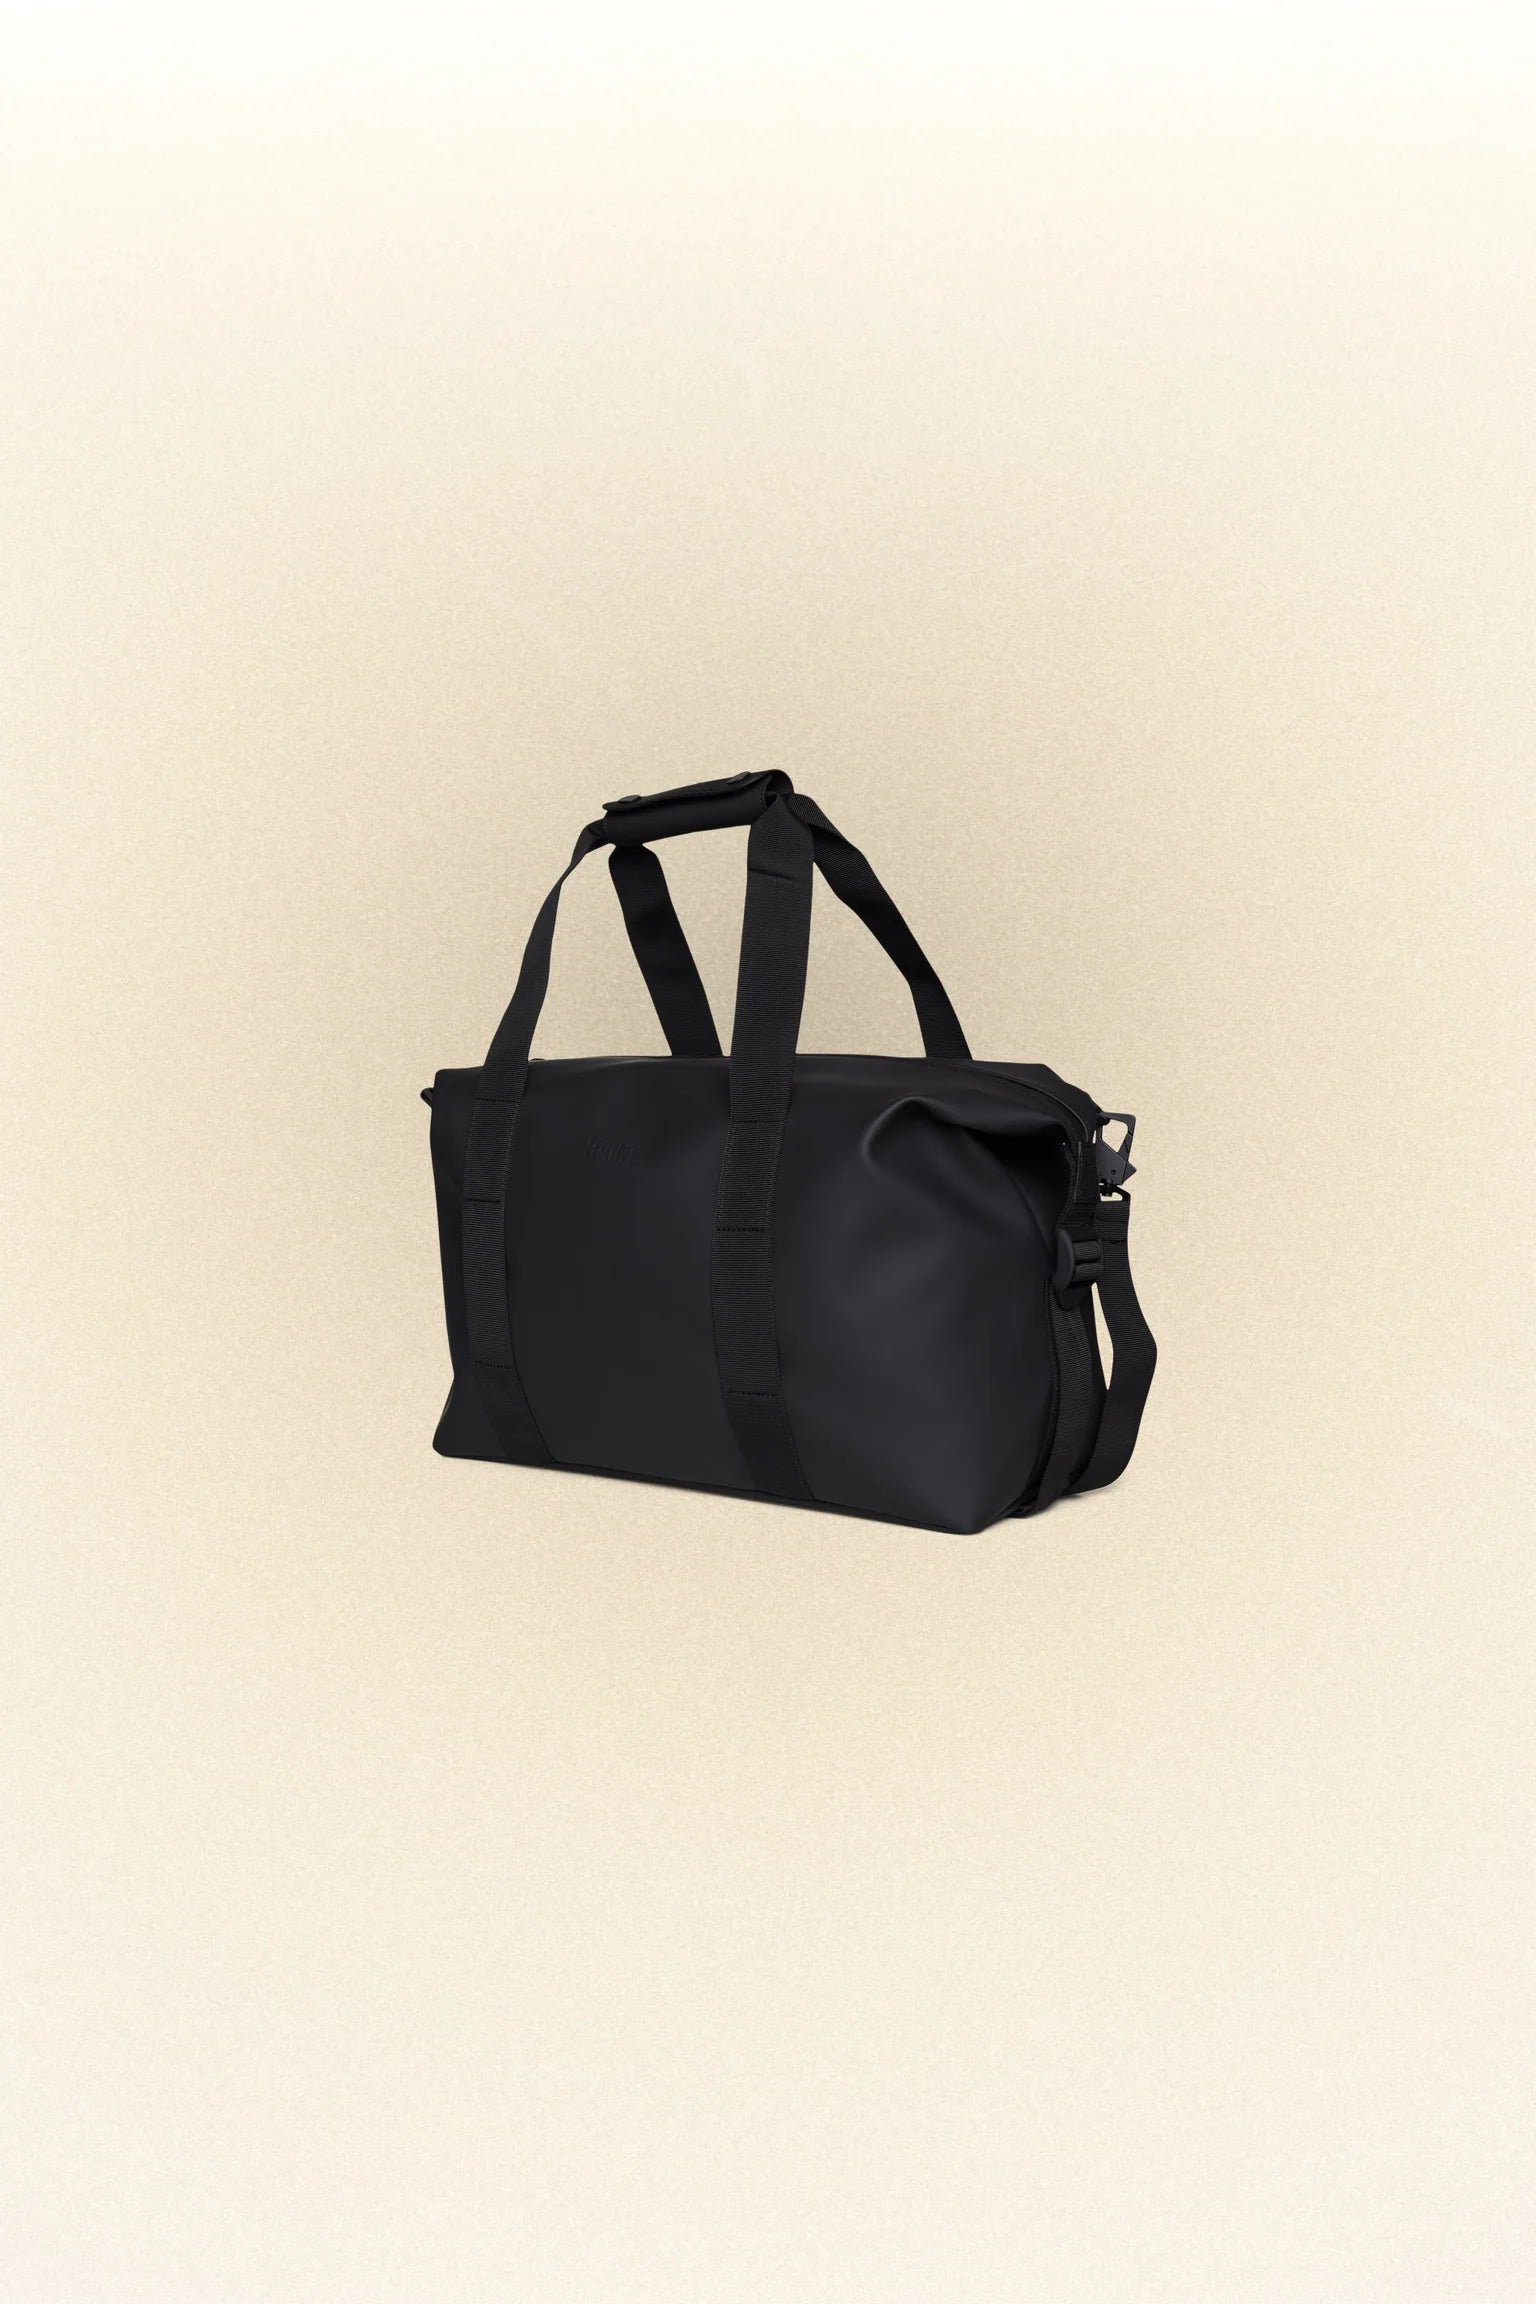 A Hilo Weekend Bag Small - Black by Rains on a white background.